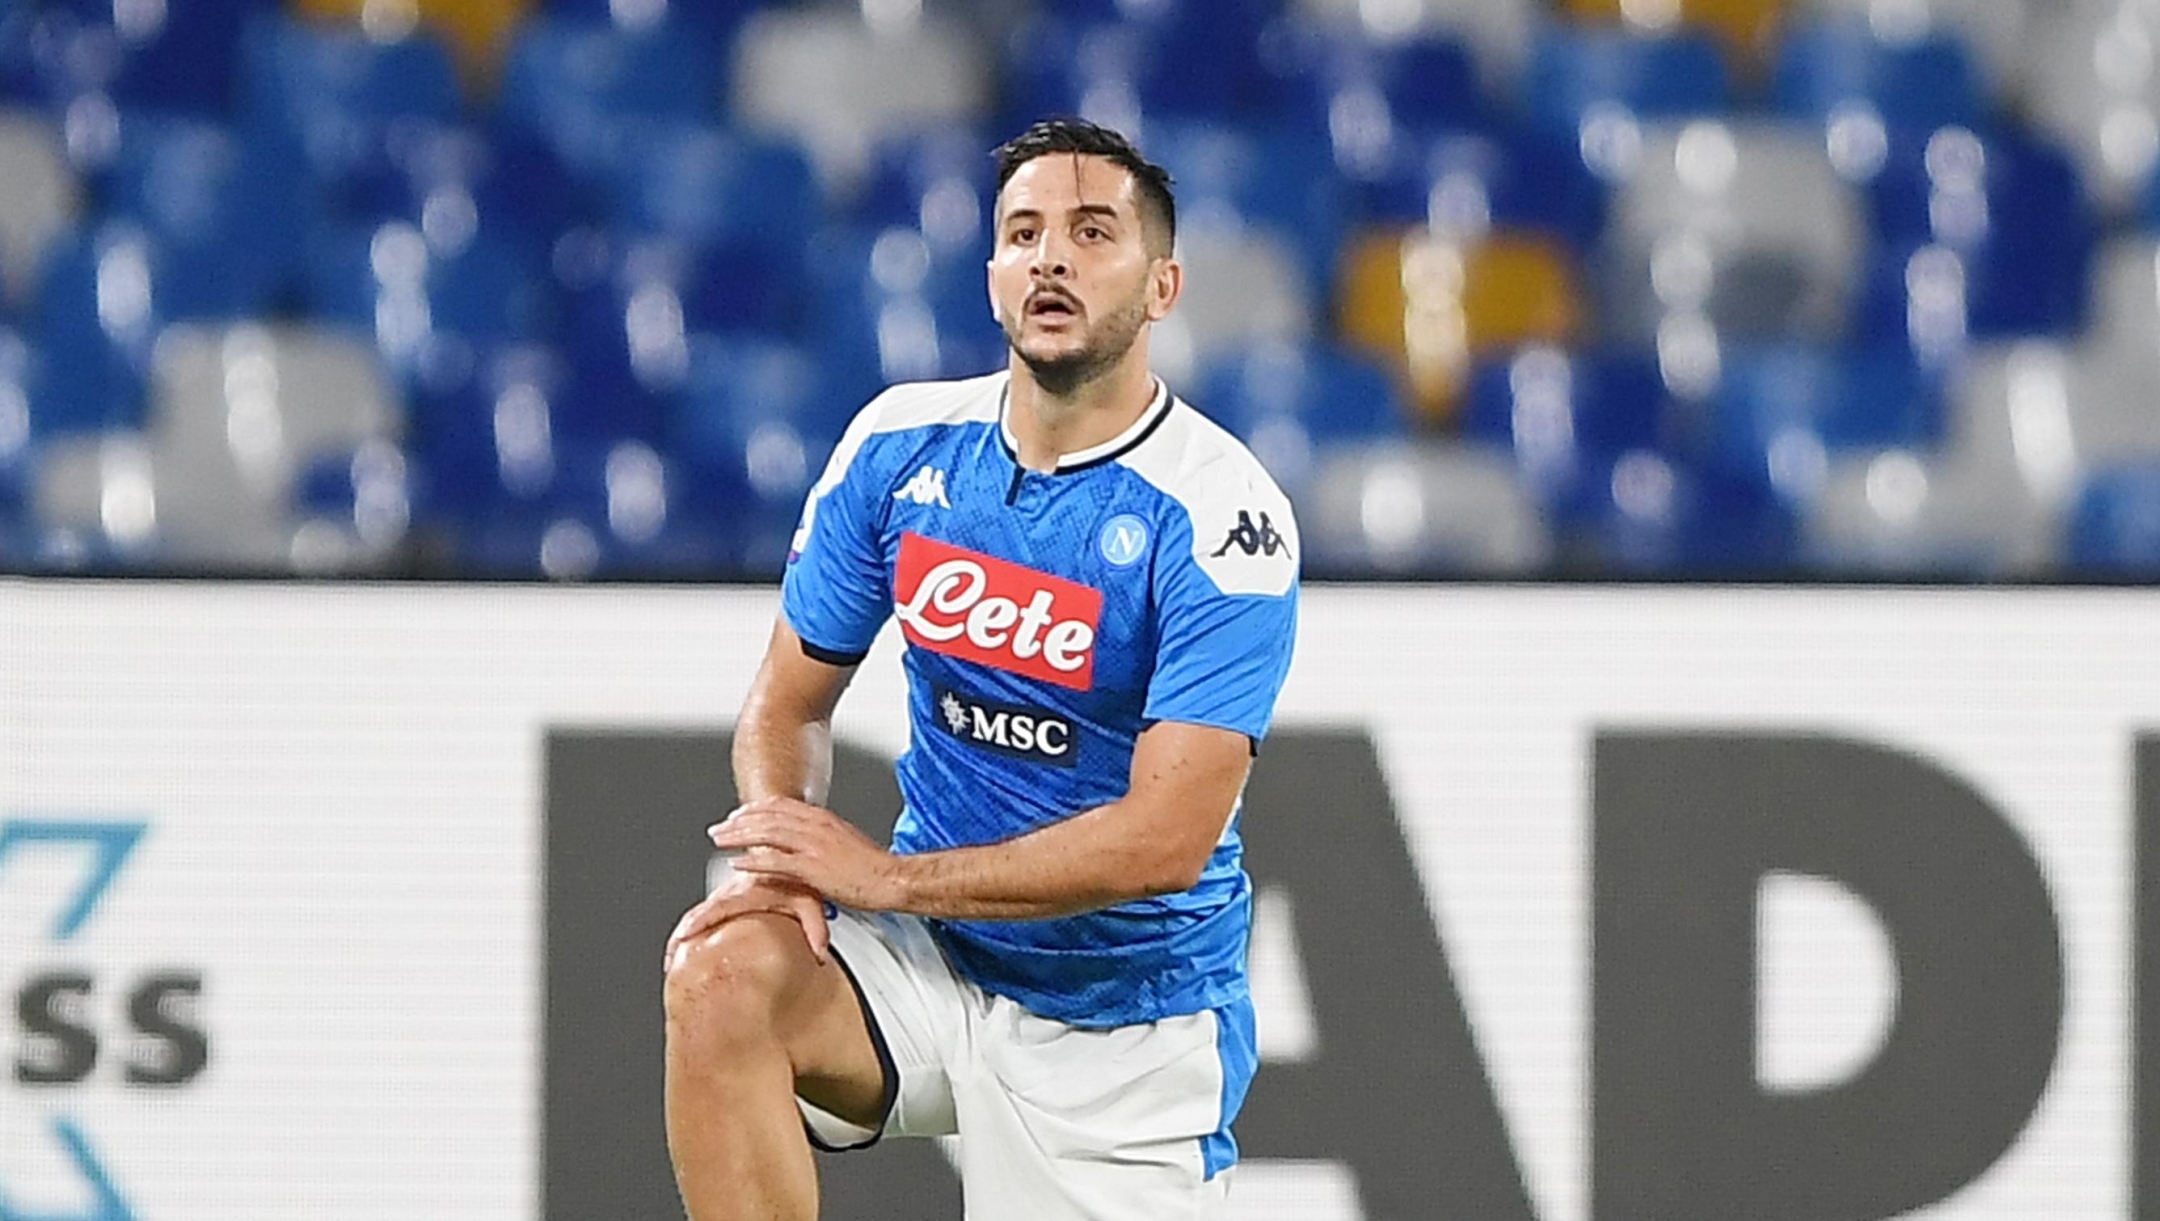 NAPLES, ITALY - SEPTEMBER 25: Kostantinos Manolas of SSC Napoli during the Serie A match between SSC Napoli and Cagliari Calcio at Stadio San Paolo on September 25, 2019 in Naples, Italy. (Photo by Francesco Pecoraro/Getty Images)